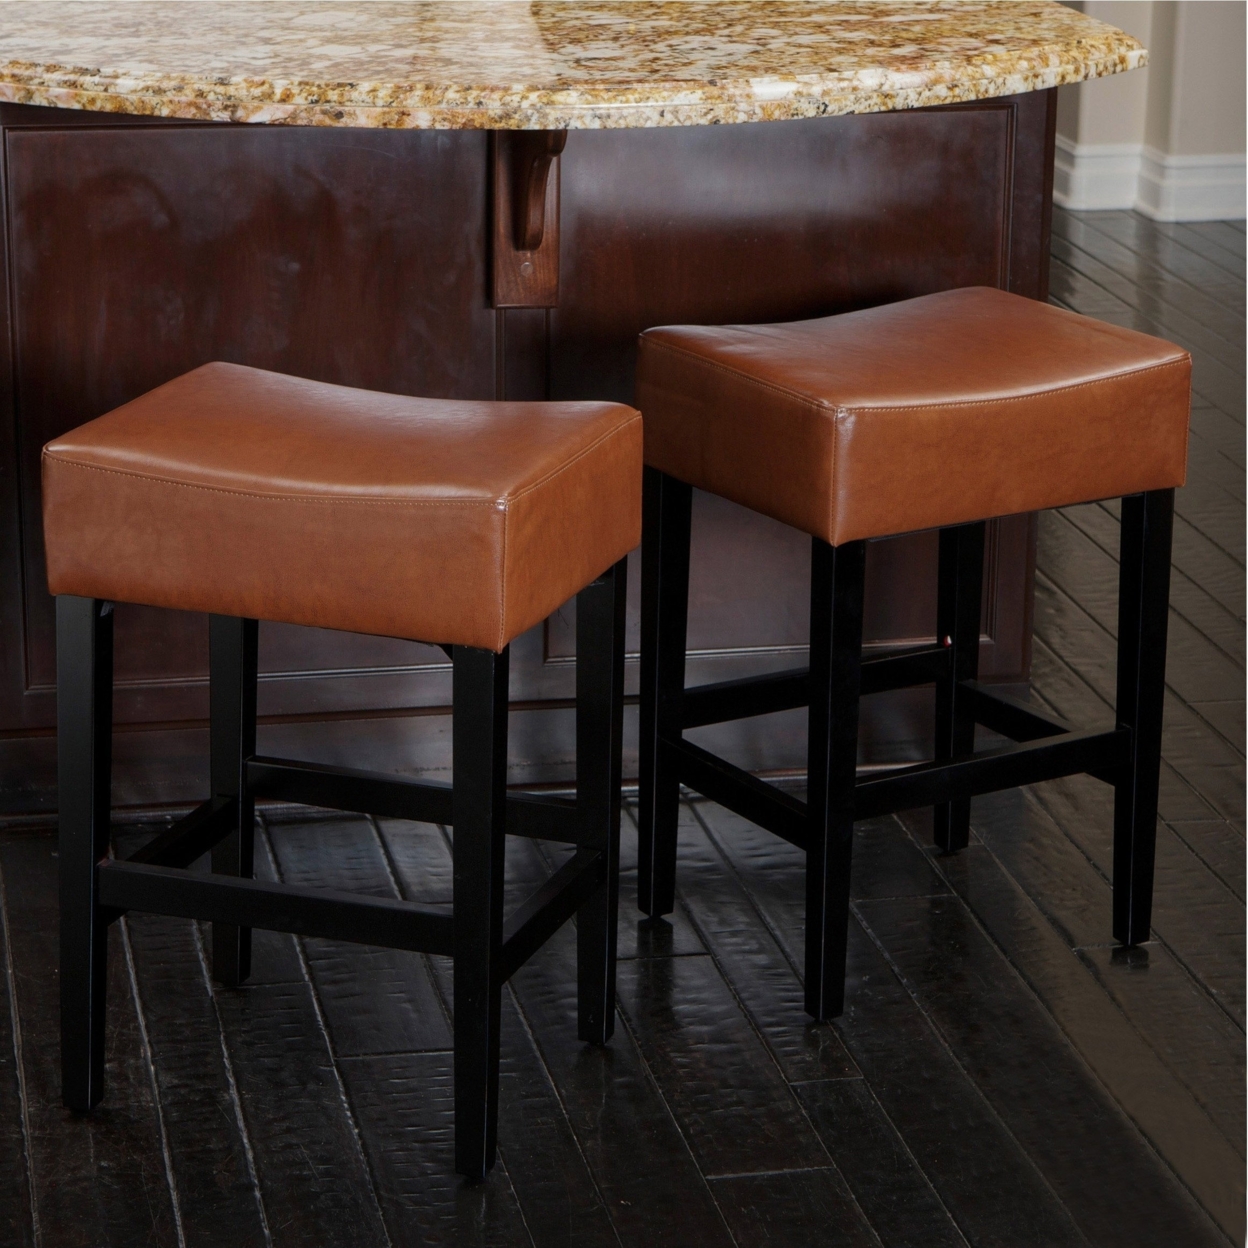 Duff Backless Leather Counter Stools (Set Of 2) - Brown, Leather, 26.46